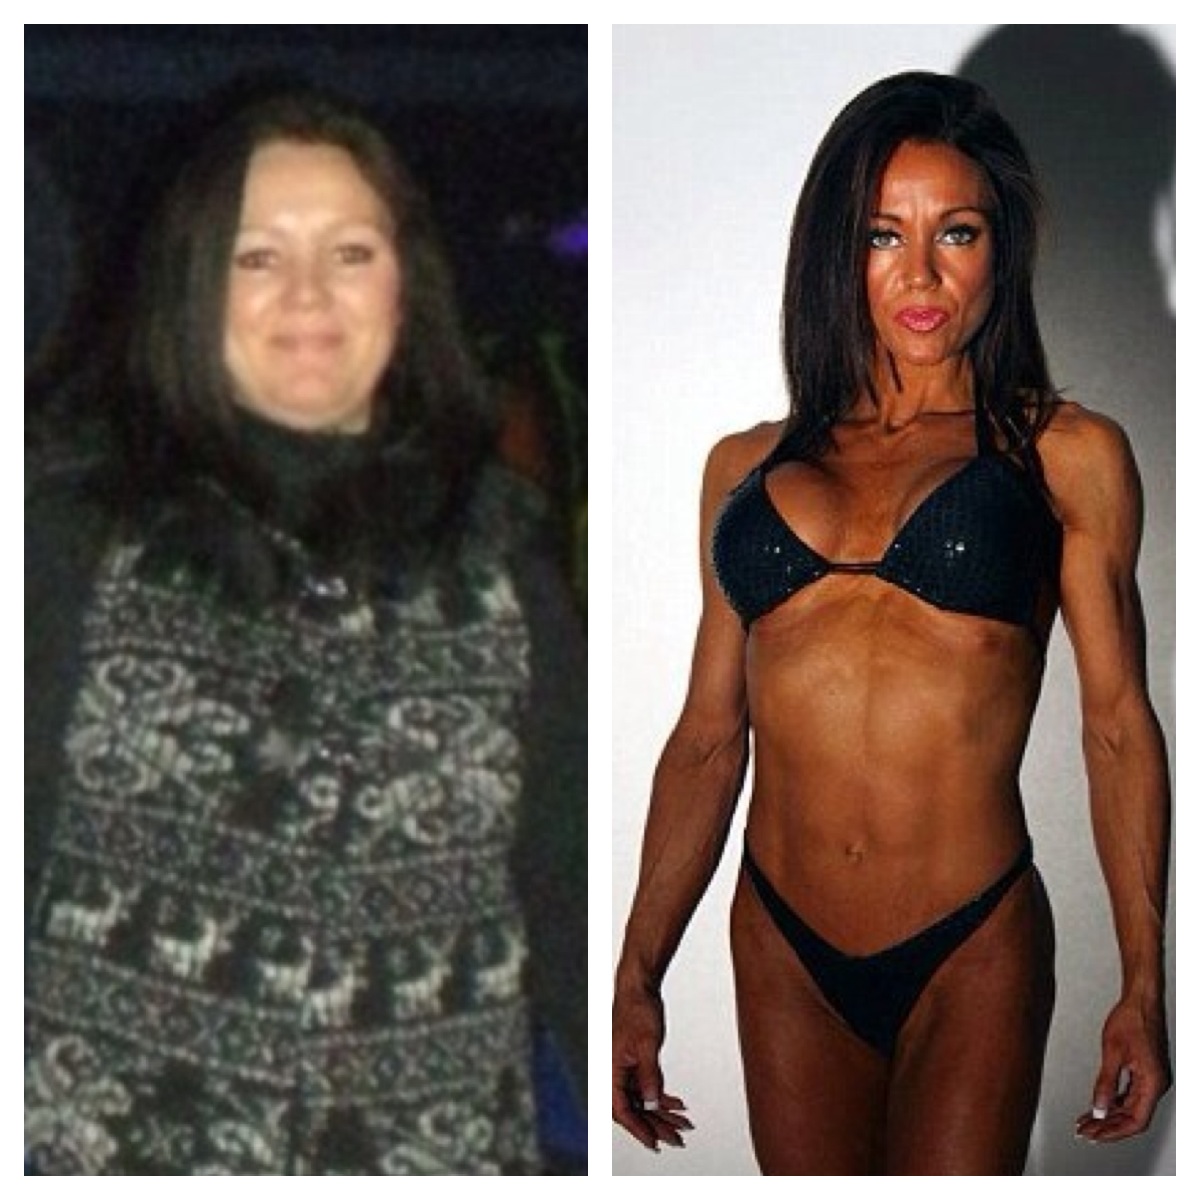 An image of Sharpbodies Personal Training   Transformation 2012 goes here.